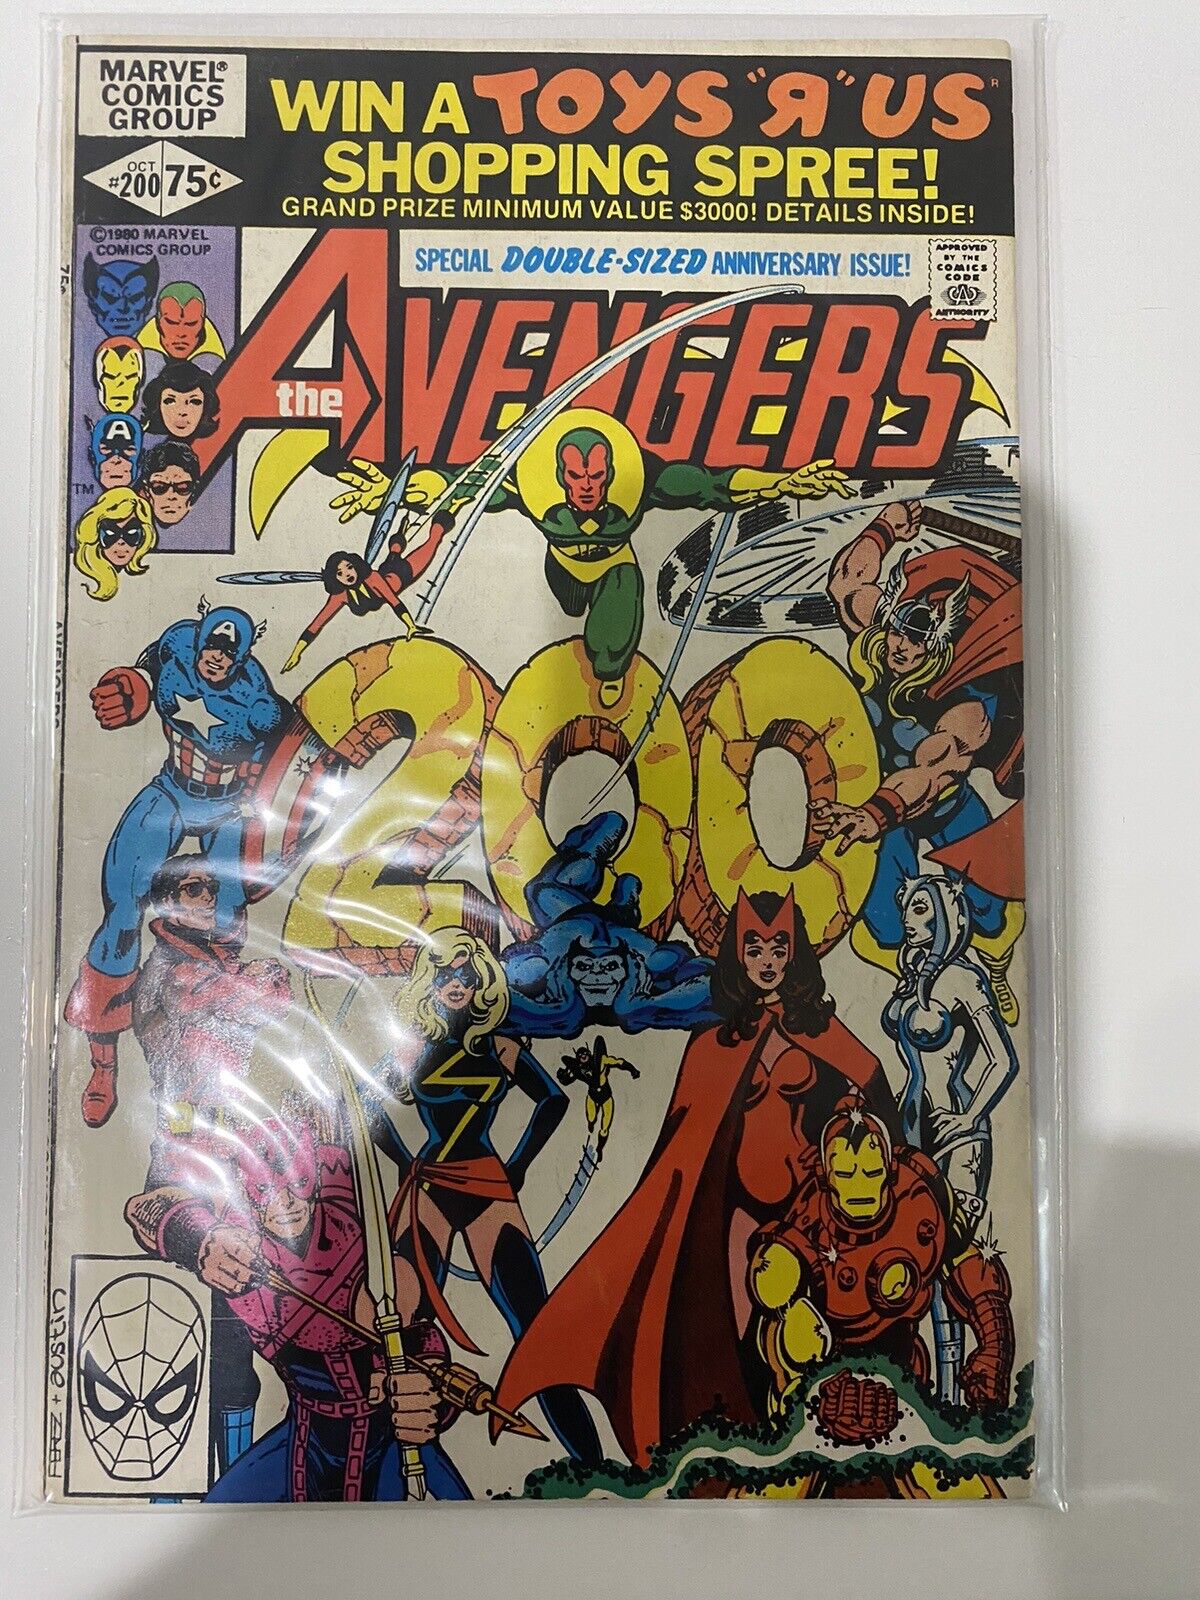 The Avengers #200 (Marvel Comics October 1980) Not A Grader As Is